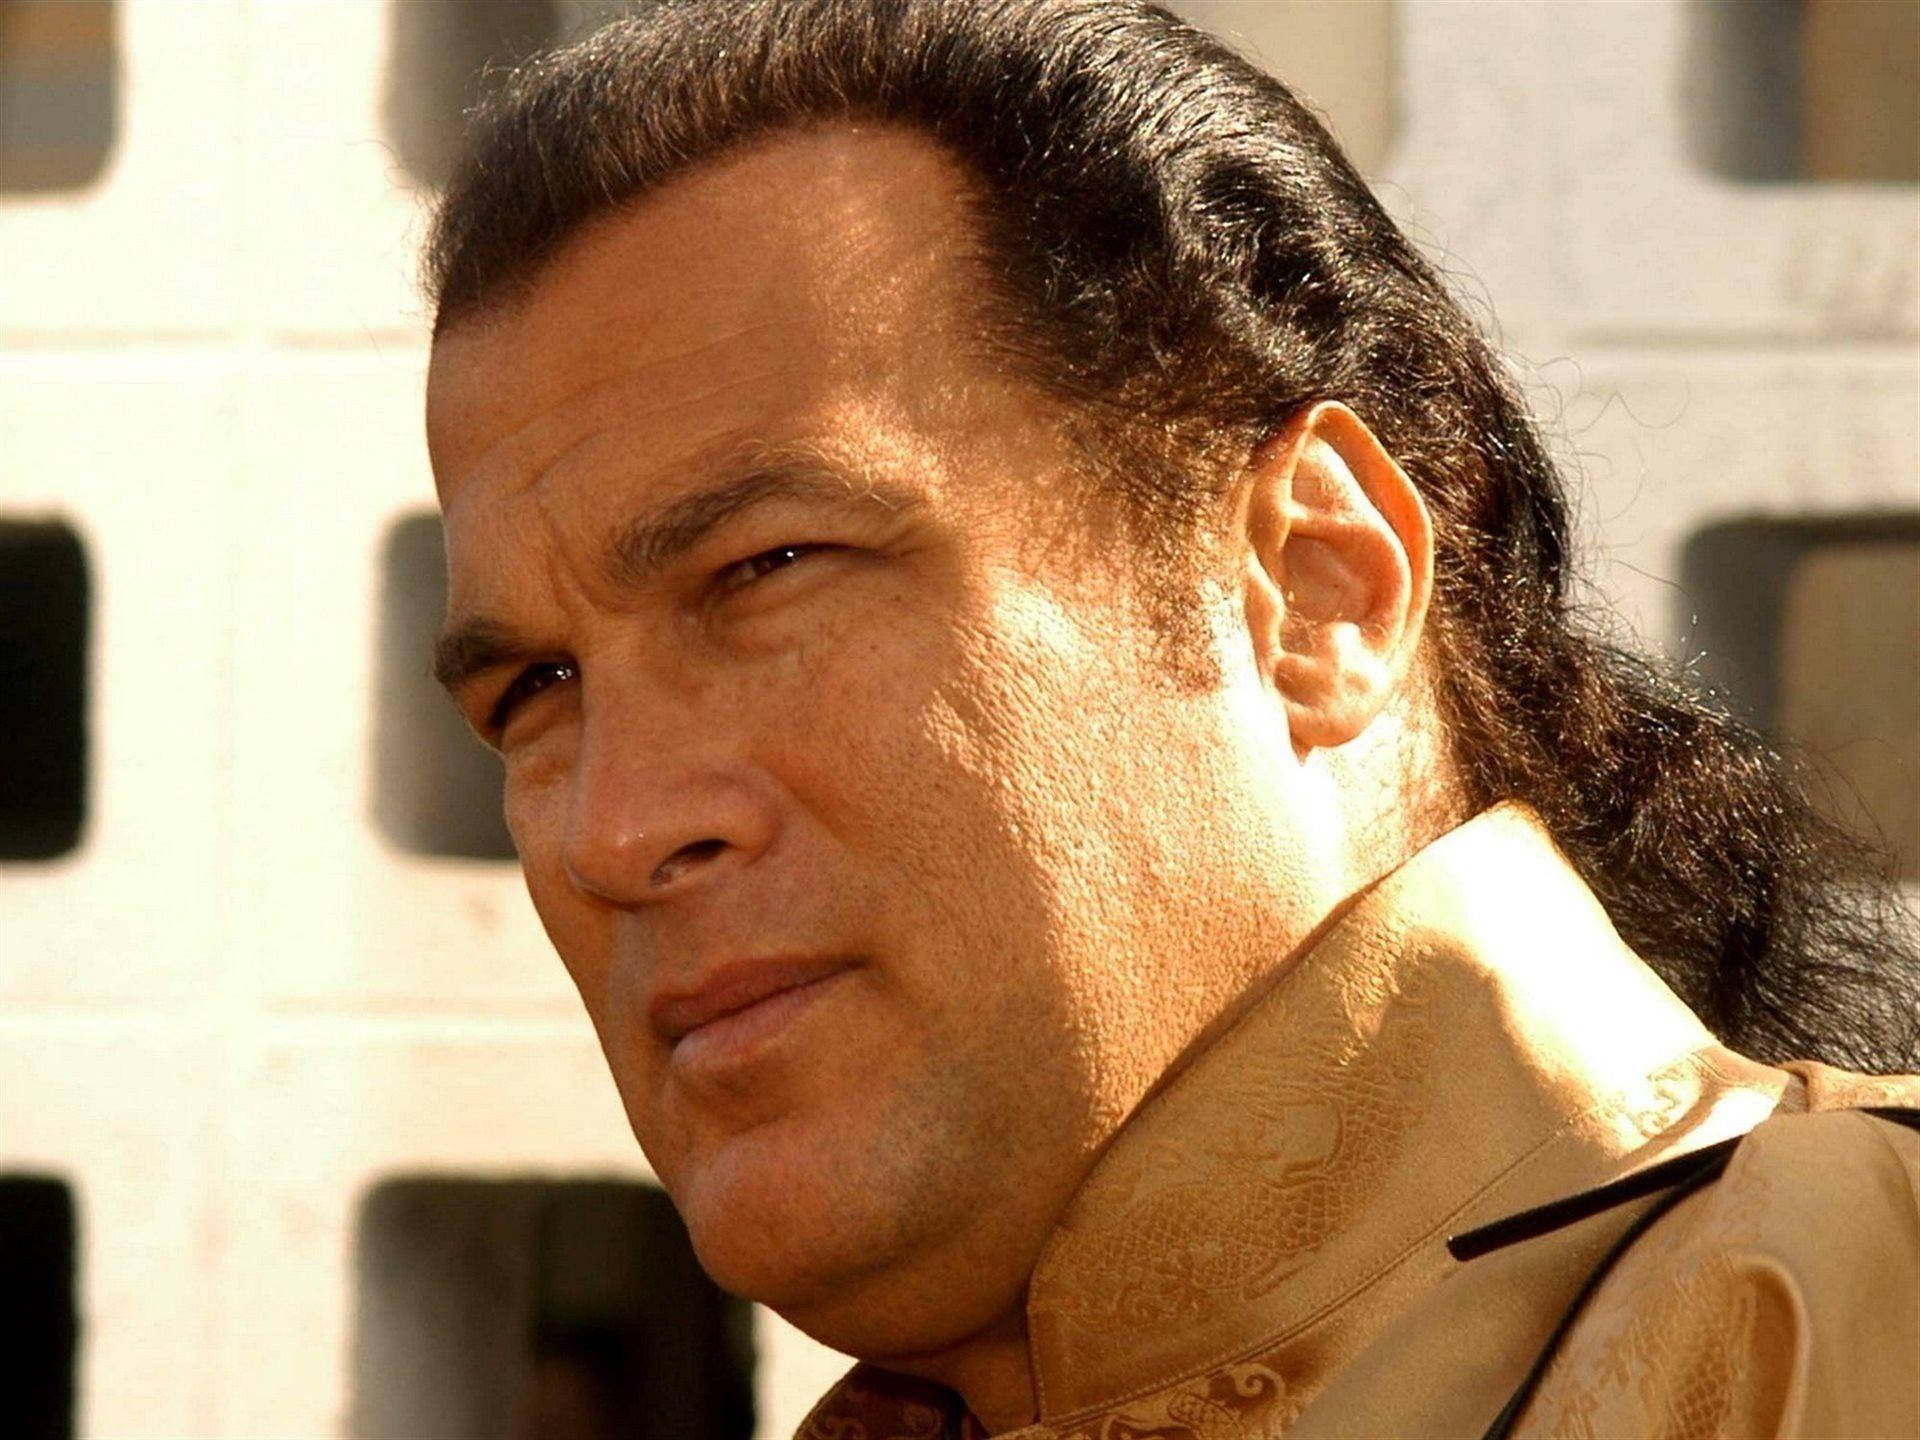 Hollywood Icon, Steven Seagal In Promotional Still Background